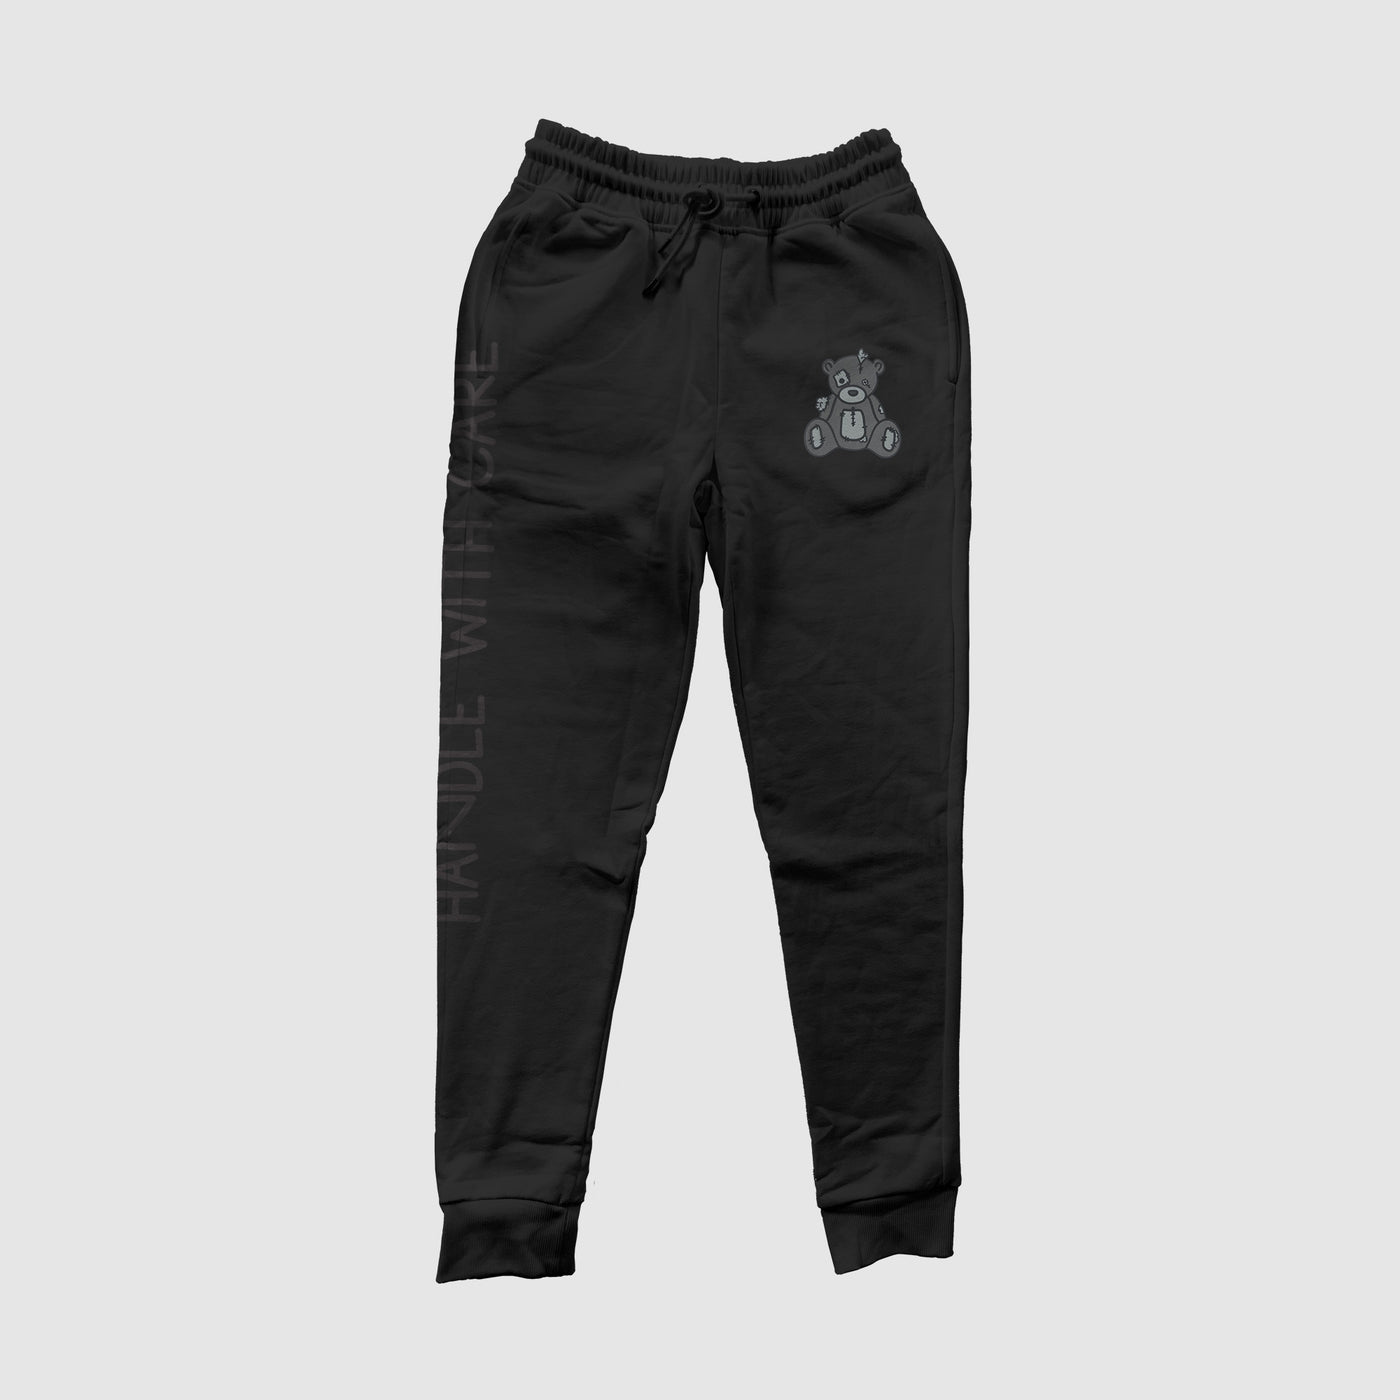 Handle With Care Blackout Jogger Pants